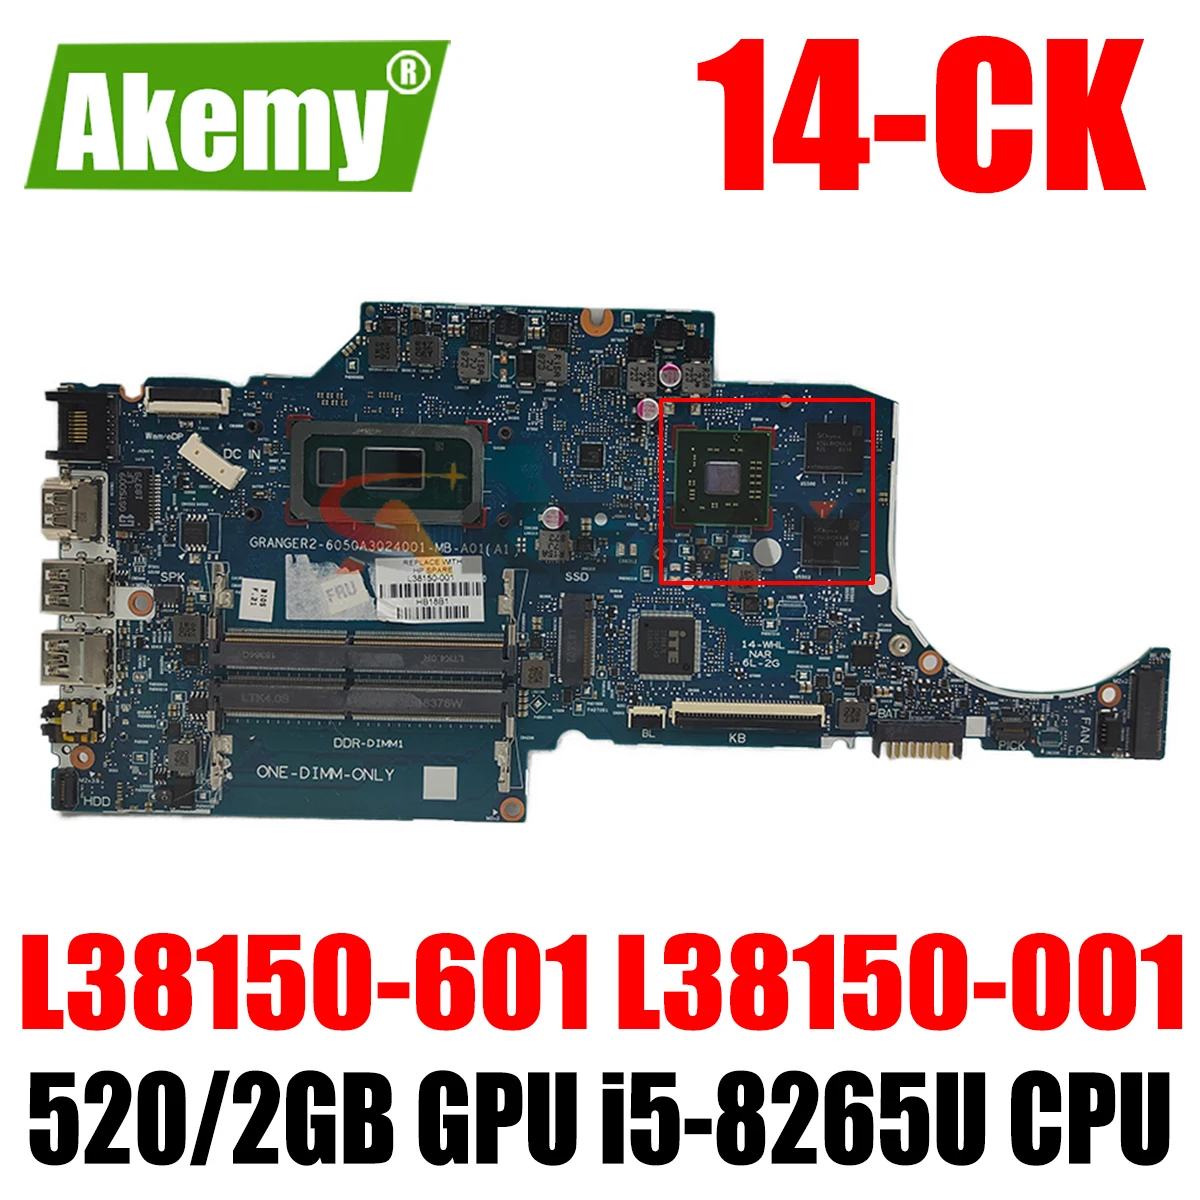 

L38150-601 L38150-001 6050A3024001-MB-A01 w 520/2GB GPU i5-8265U CPU for HP Laptop 14-CK 240 246 G7 NoteBook PC Motherboard